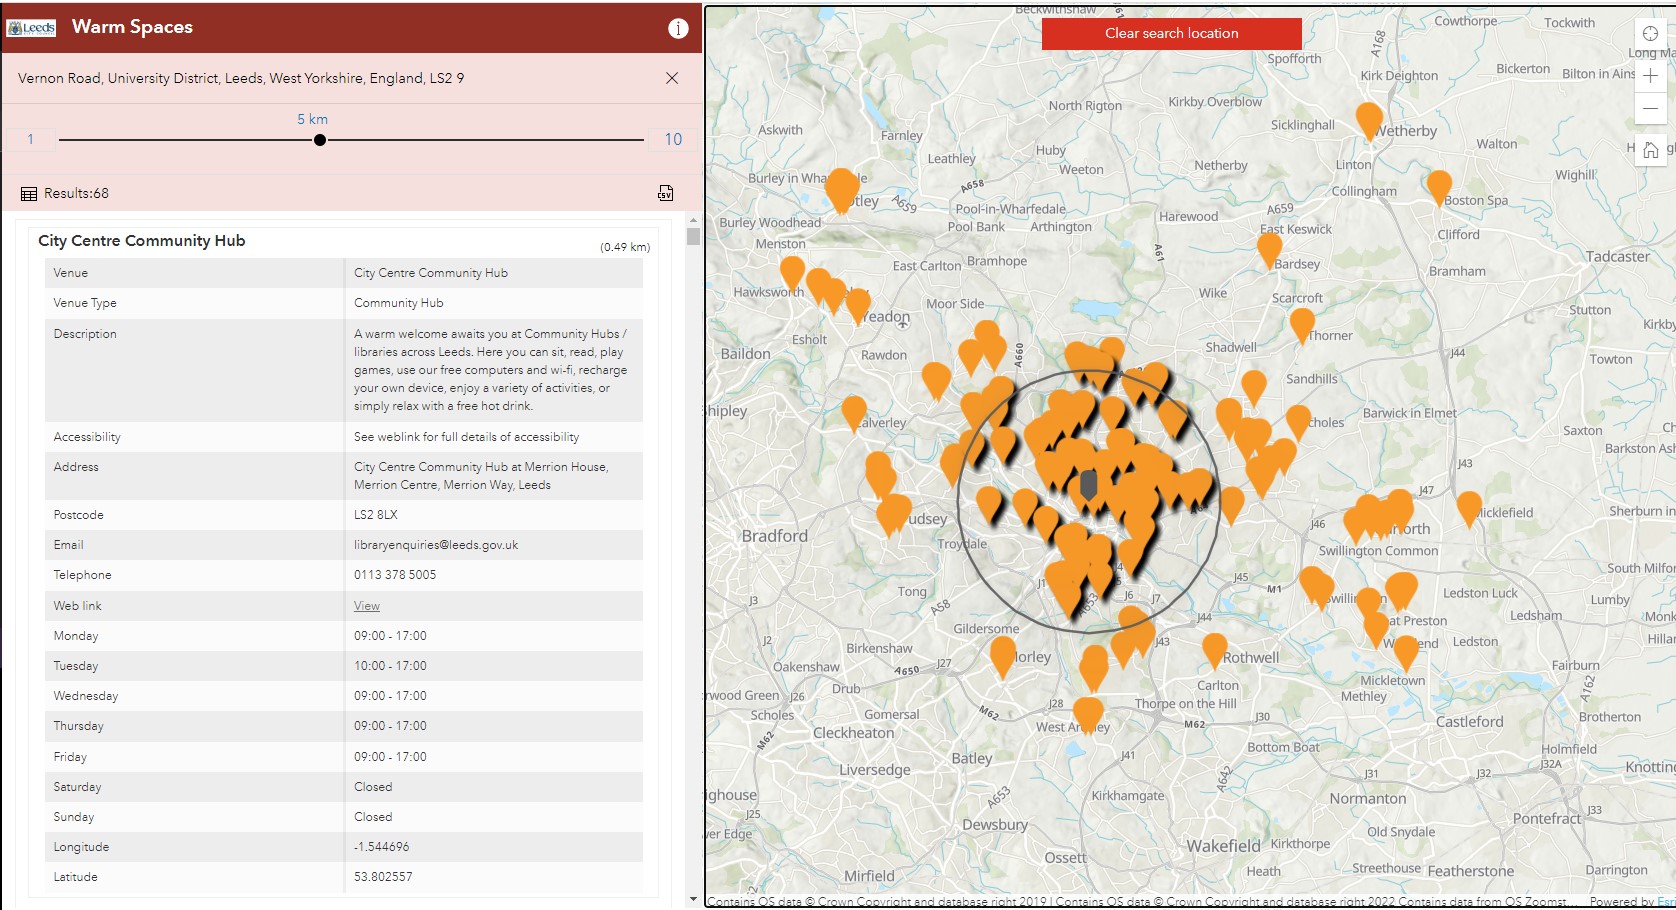 A screenshot of an interactive Warm Spaces map for Leeds